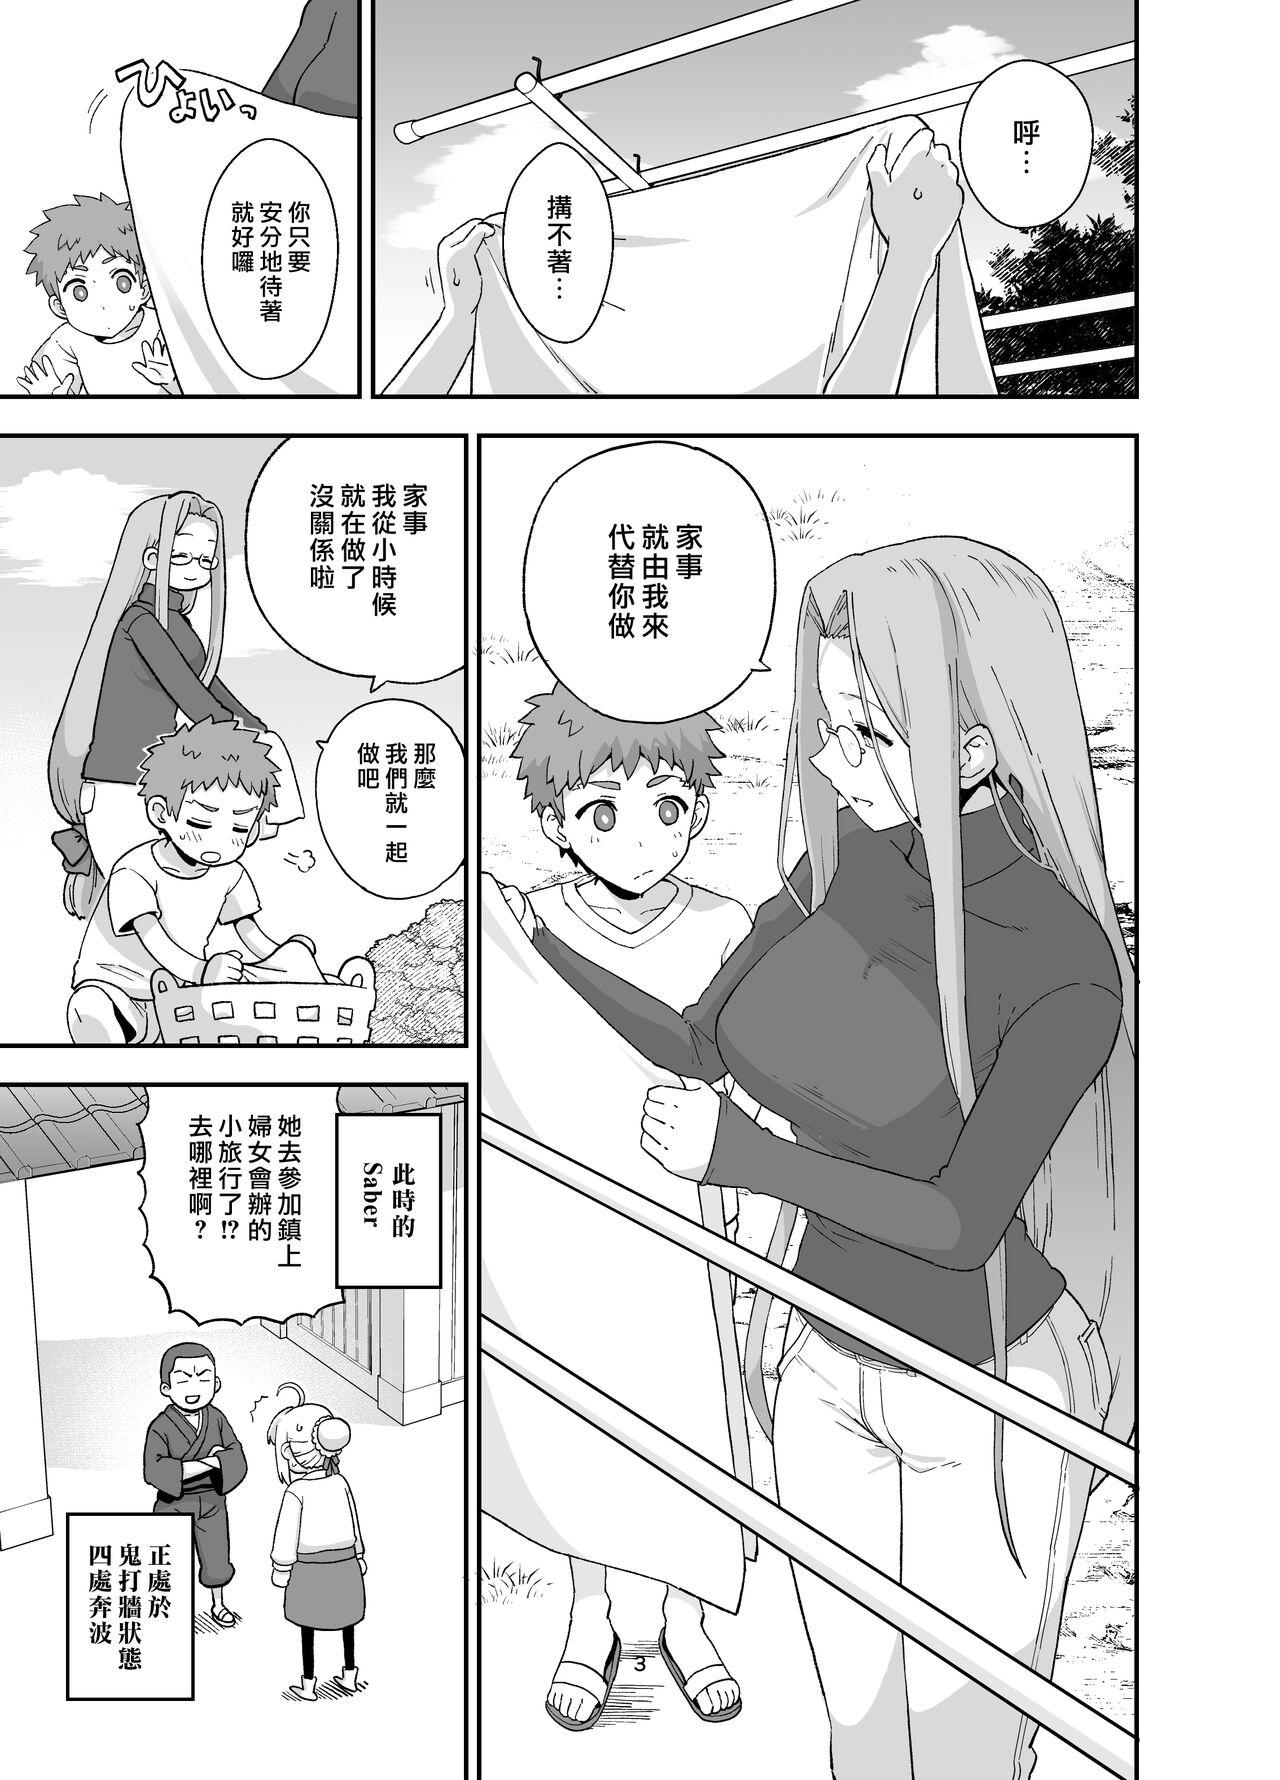 Puto Rider-san to Orusuban - Fate stay night Francaise - Page 6